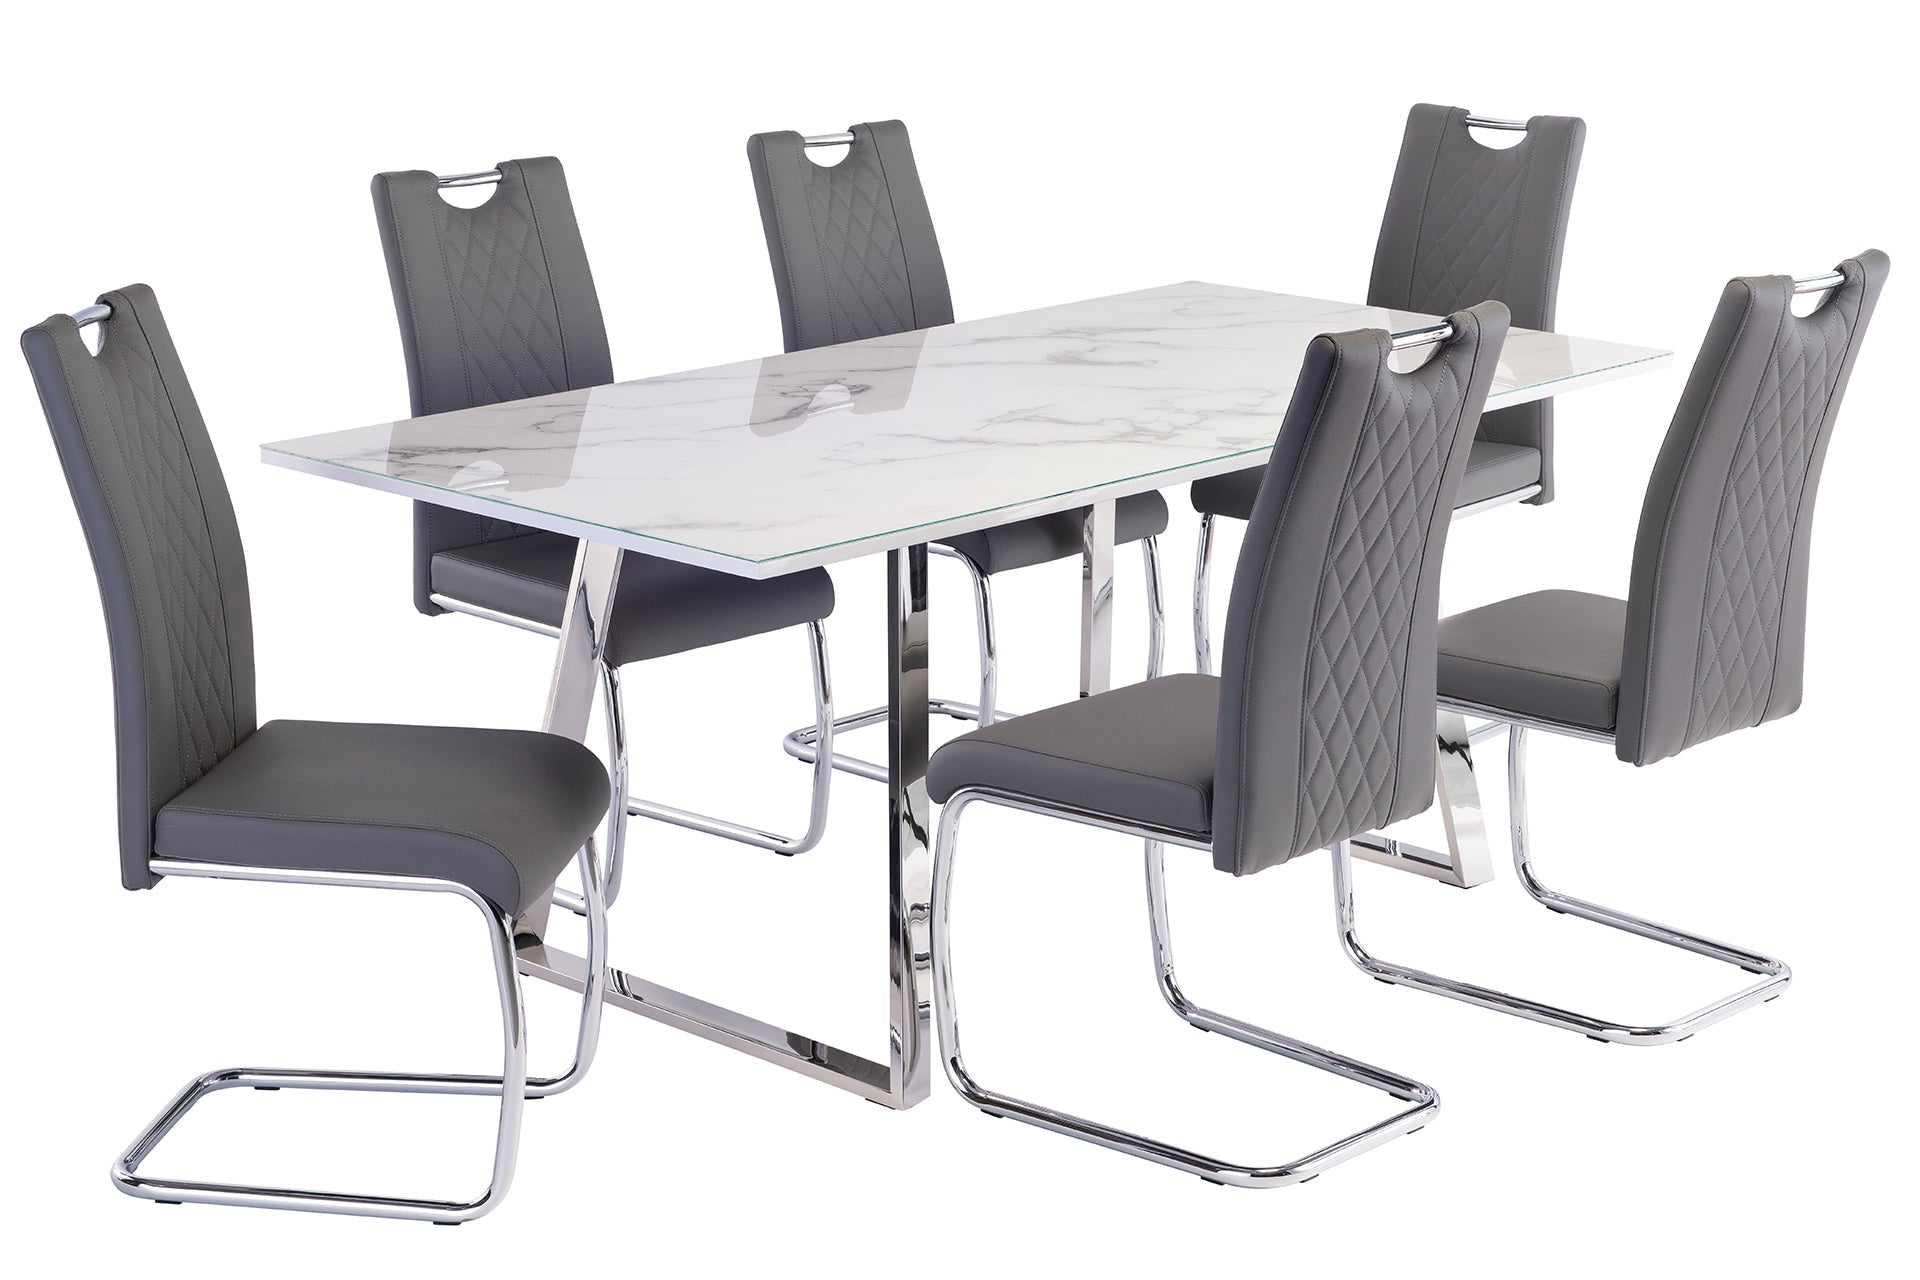 Vastmont 1.8m Dining Table Set - White Marble - 6 Chairs